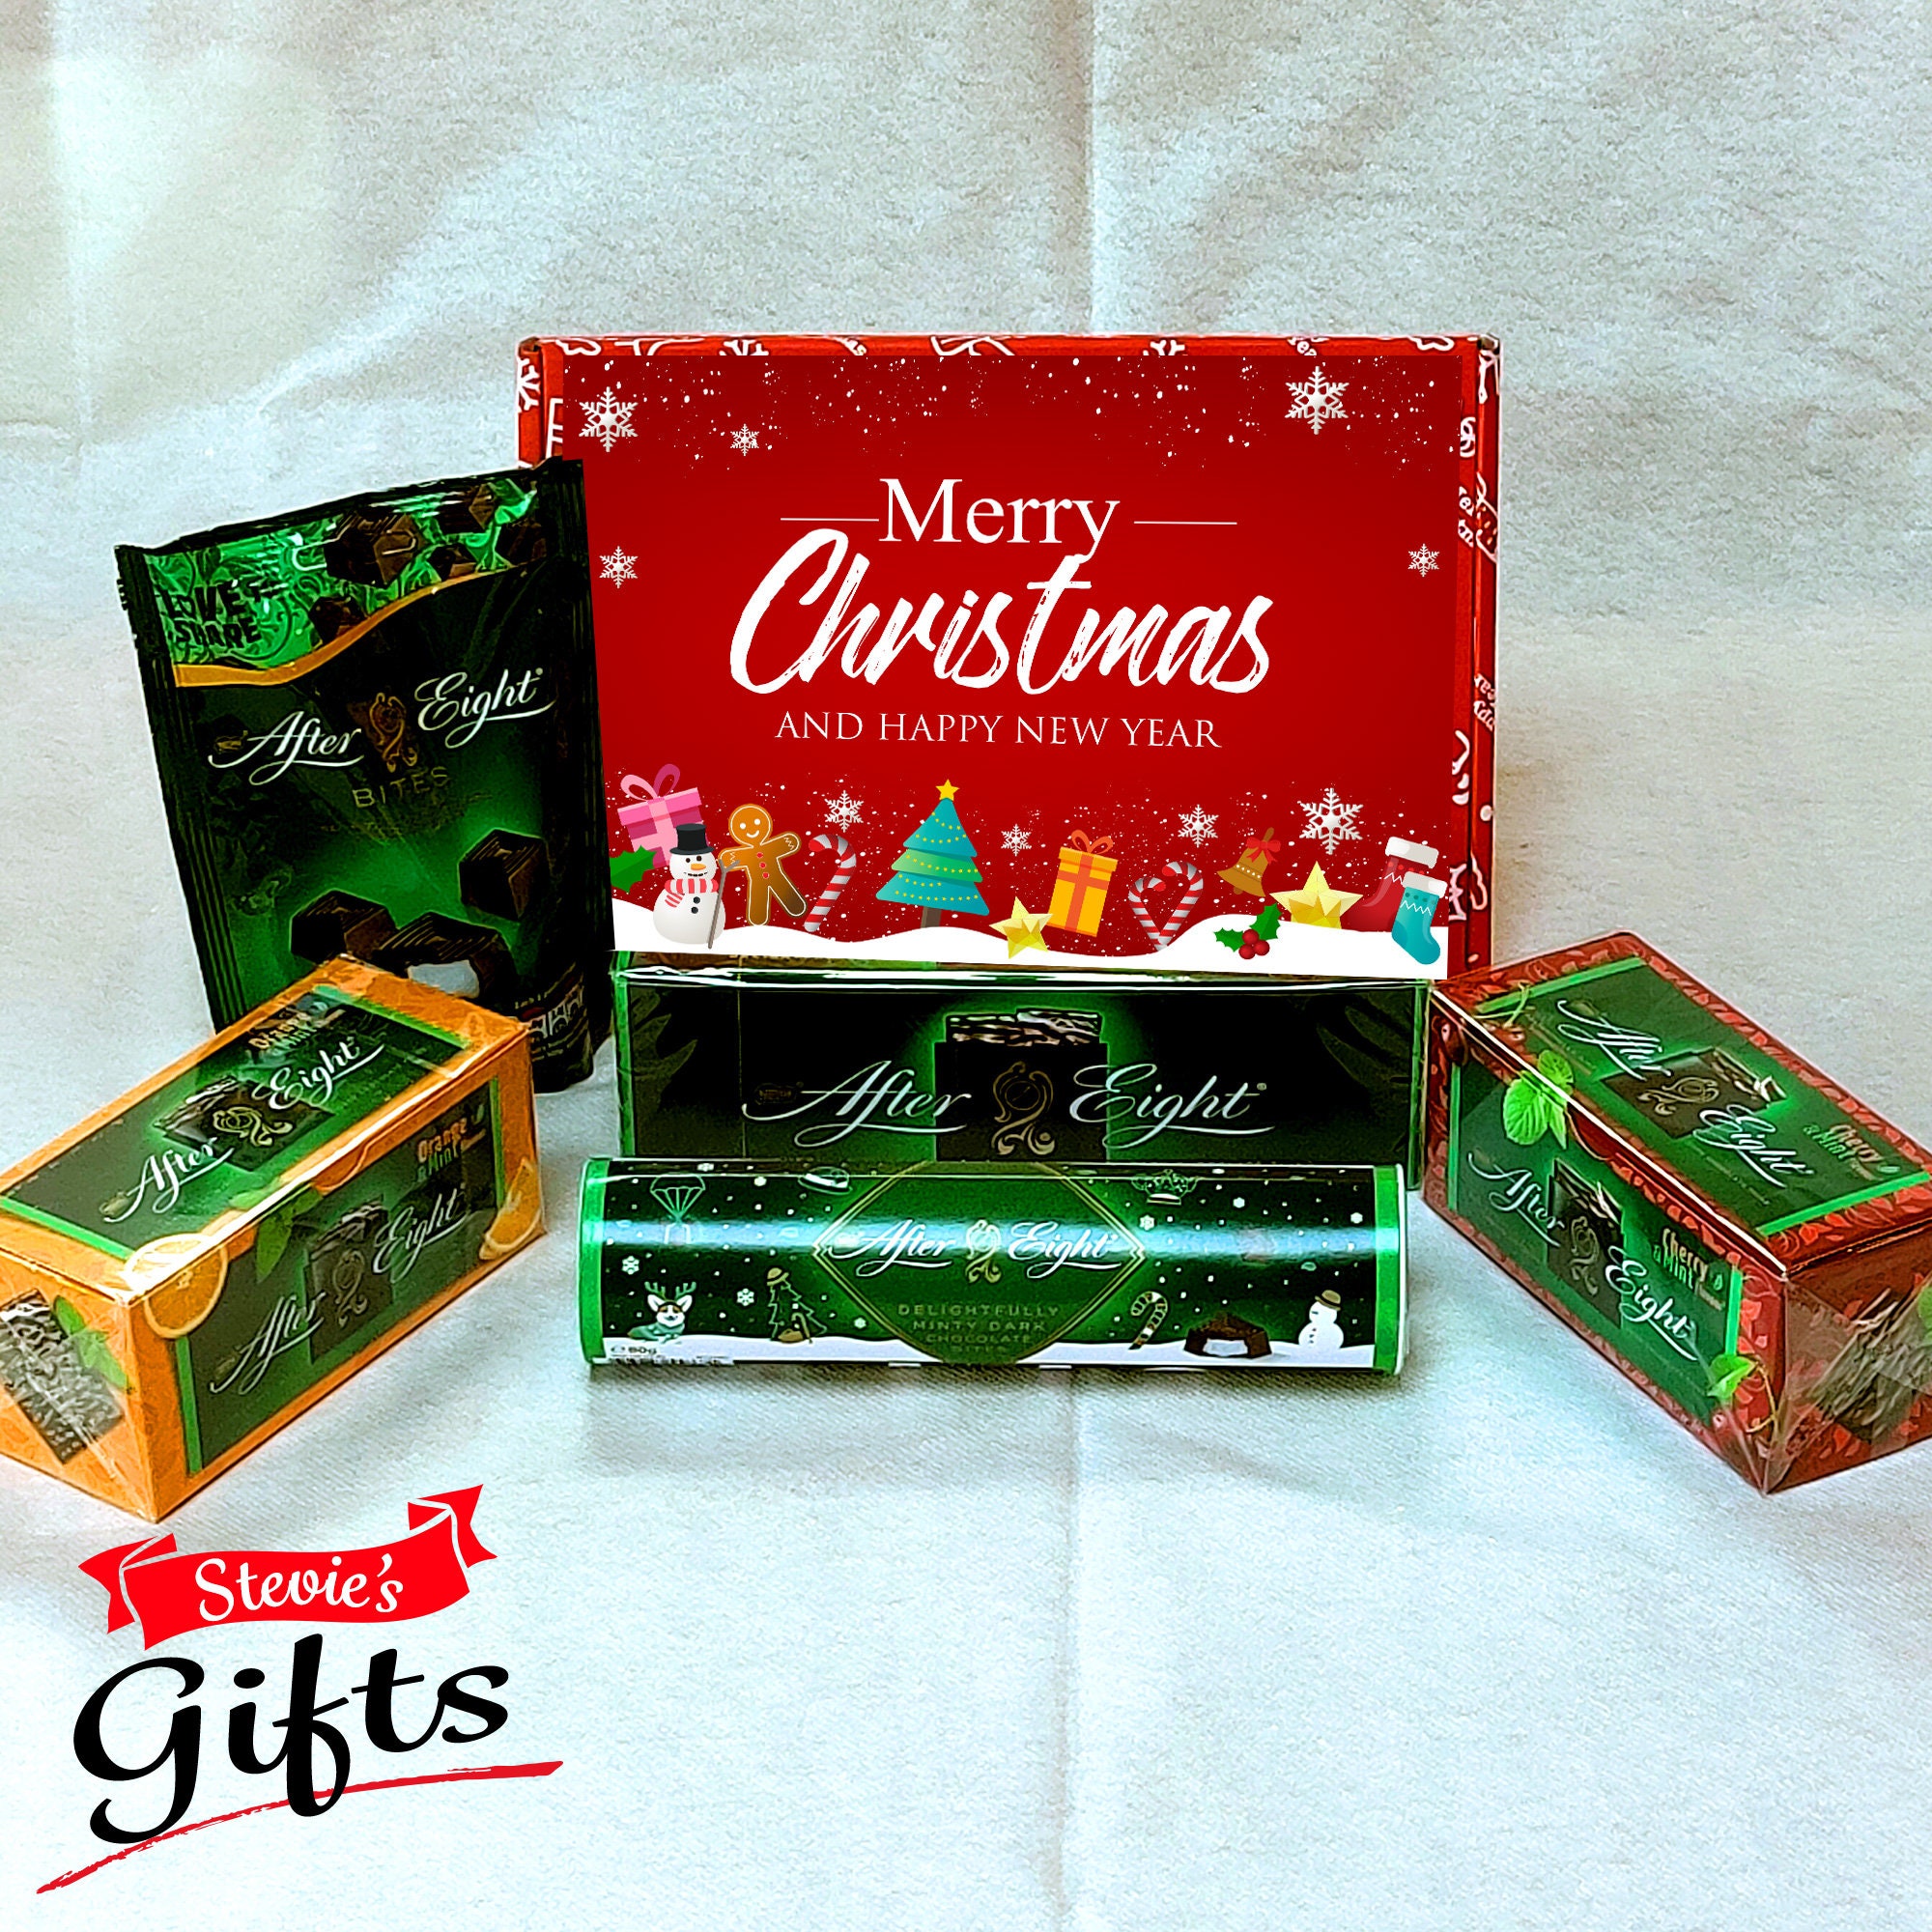 Merry Christmas After Eight Festive Chocolate Gift Box Thins, Tube, Bites,  Orange and Mint, Cherry and Mint Flavours by Stevies Gifts 